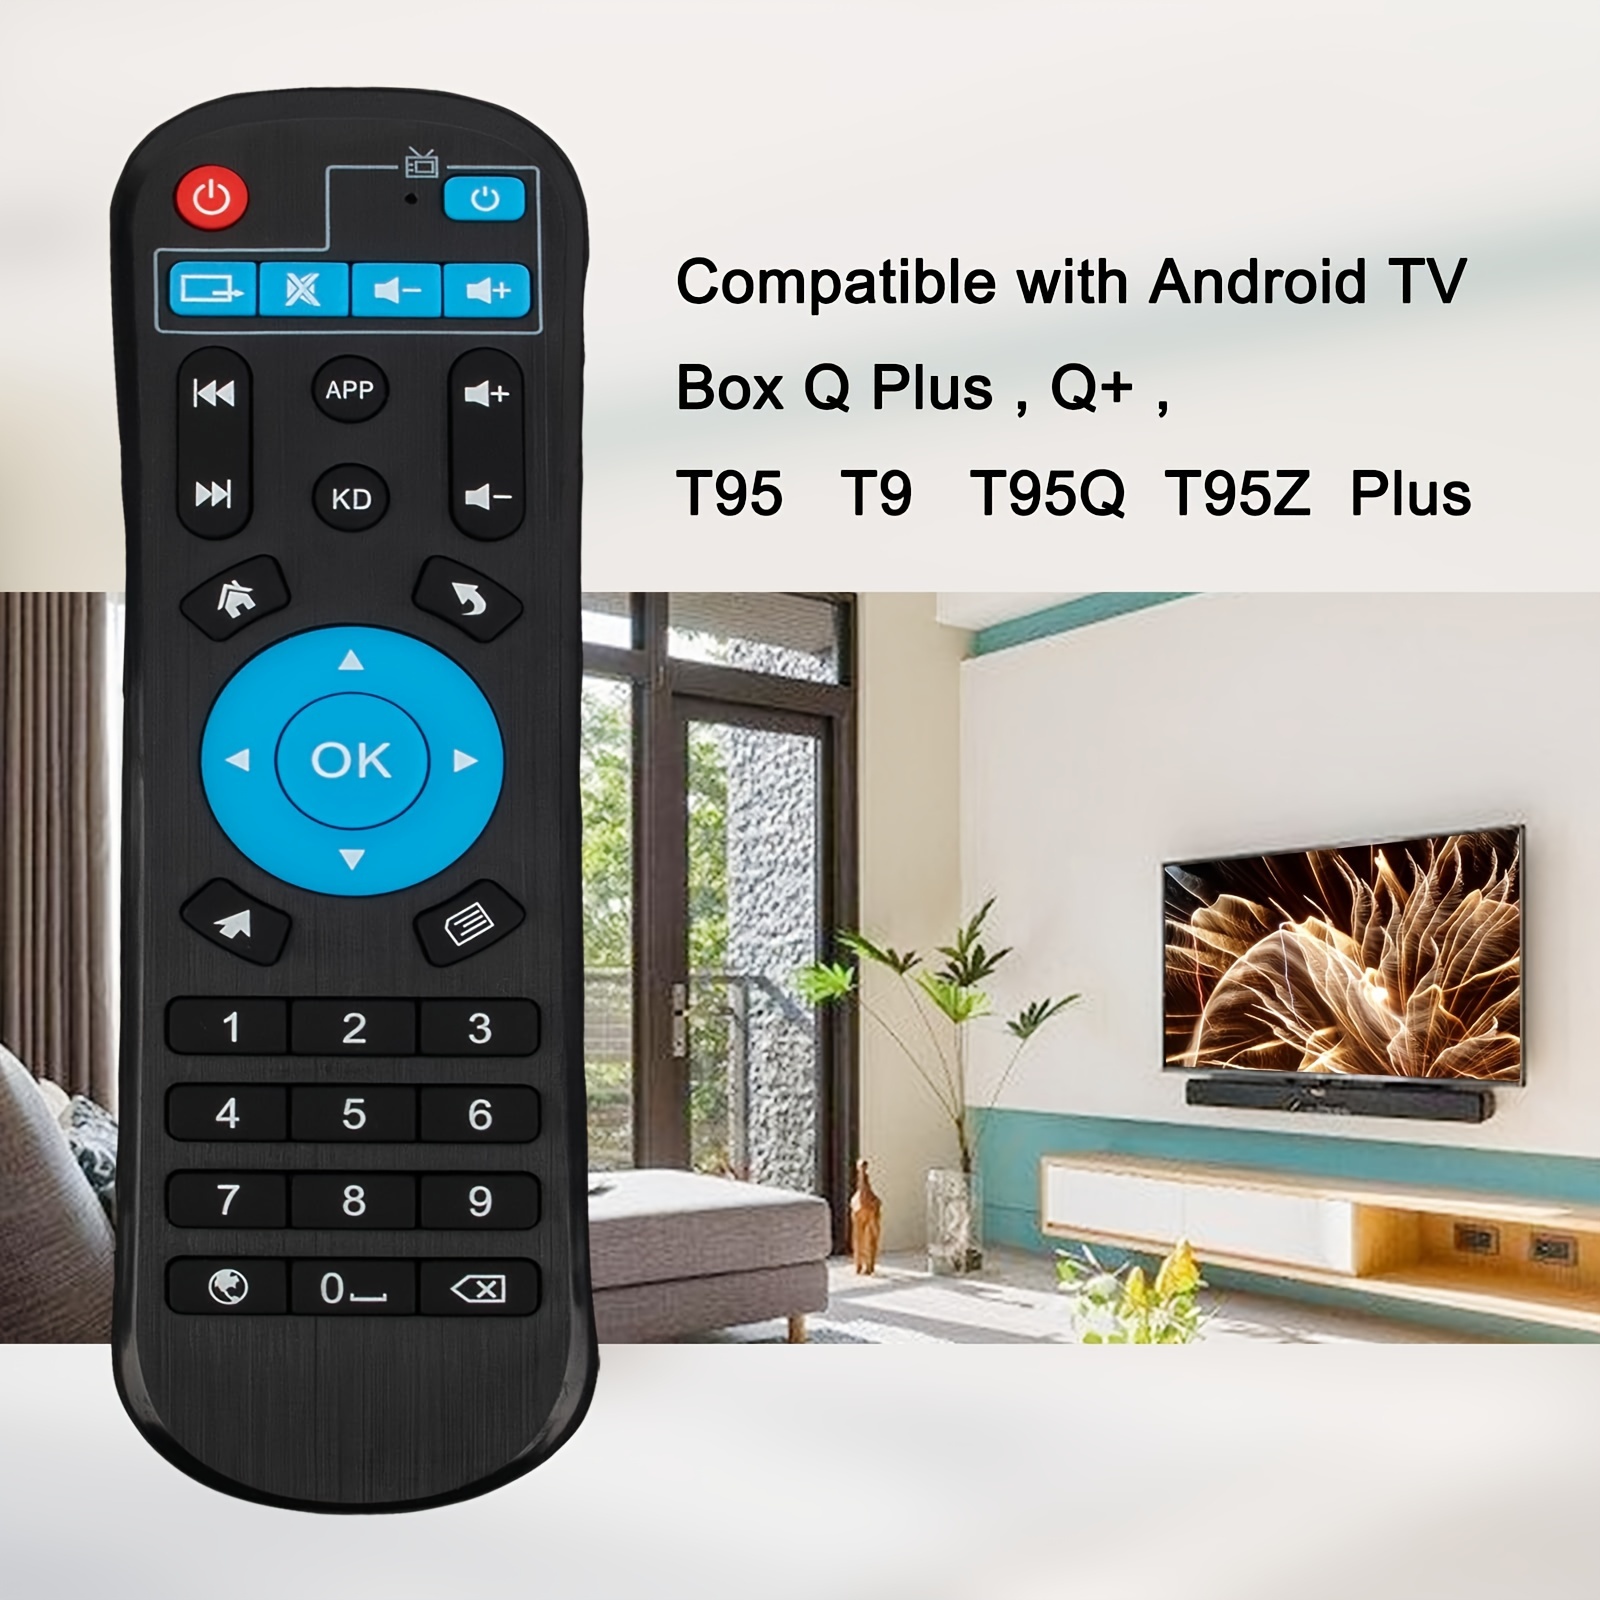 Elevate Your Viewing with the M3H Google TV Box - HDMI 1.4, 1080p Support,  Multi-Language, and Android 4.0 for Ultimate Entertainment